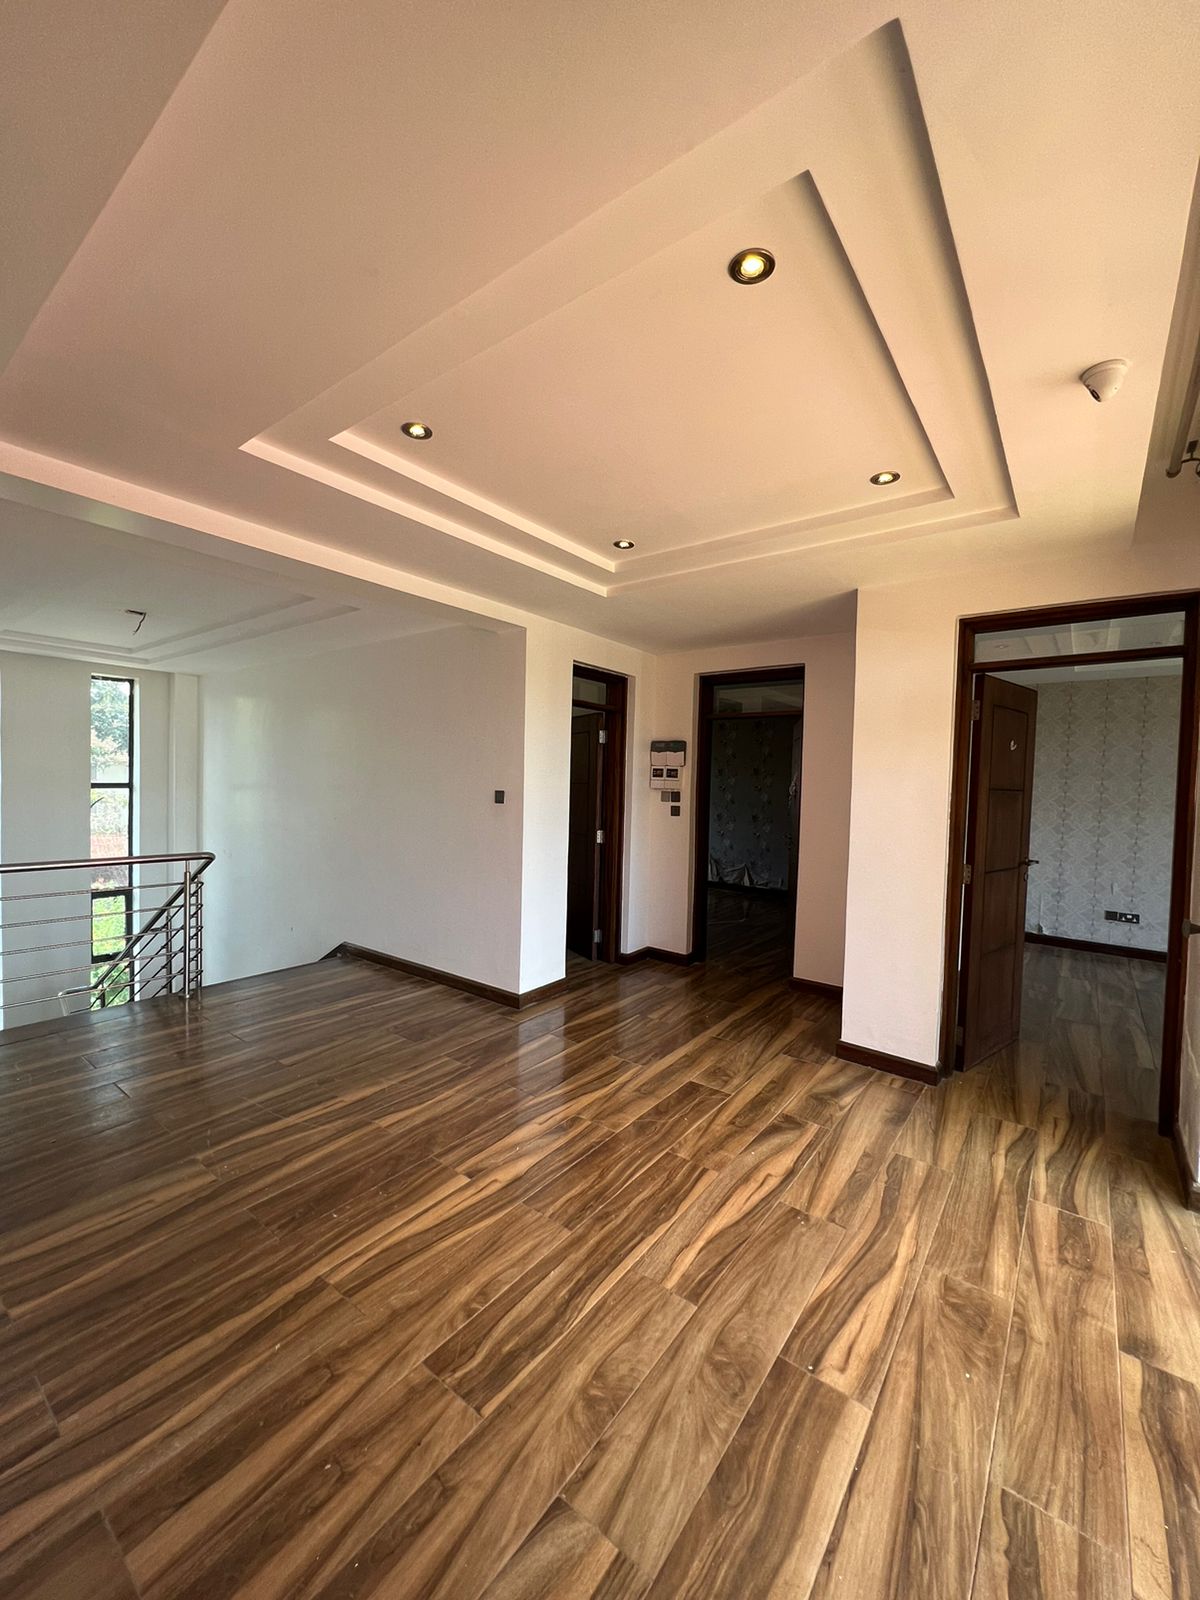 5 bedroom townhouses plus sq for sale in the leafy suburb of lavington area Musilli Homes